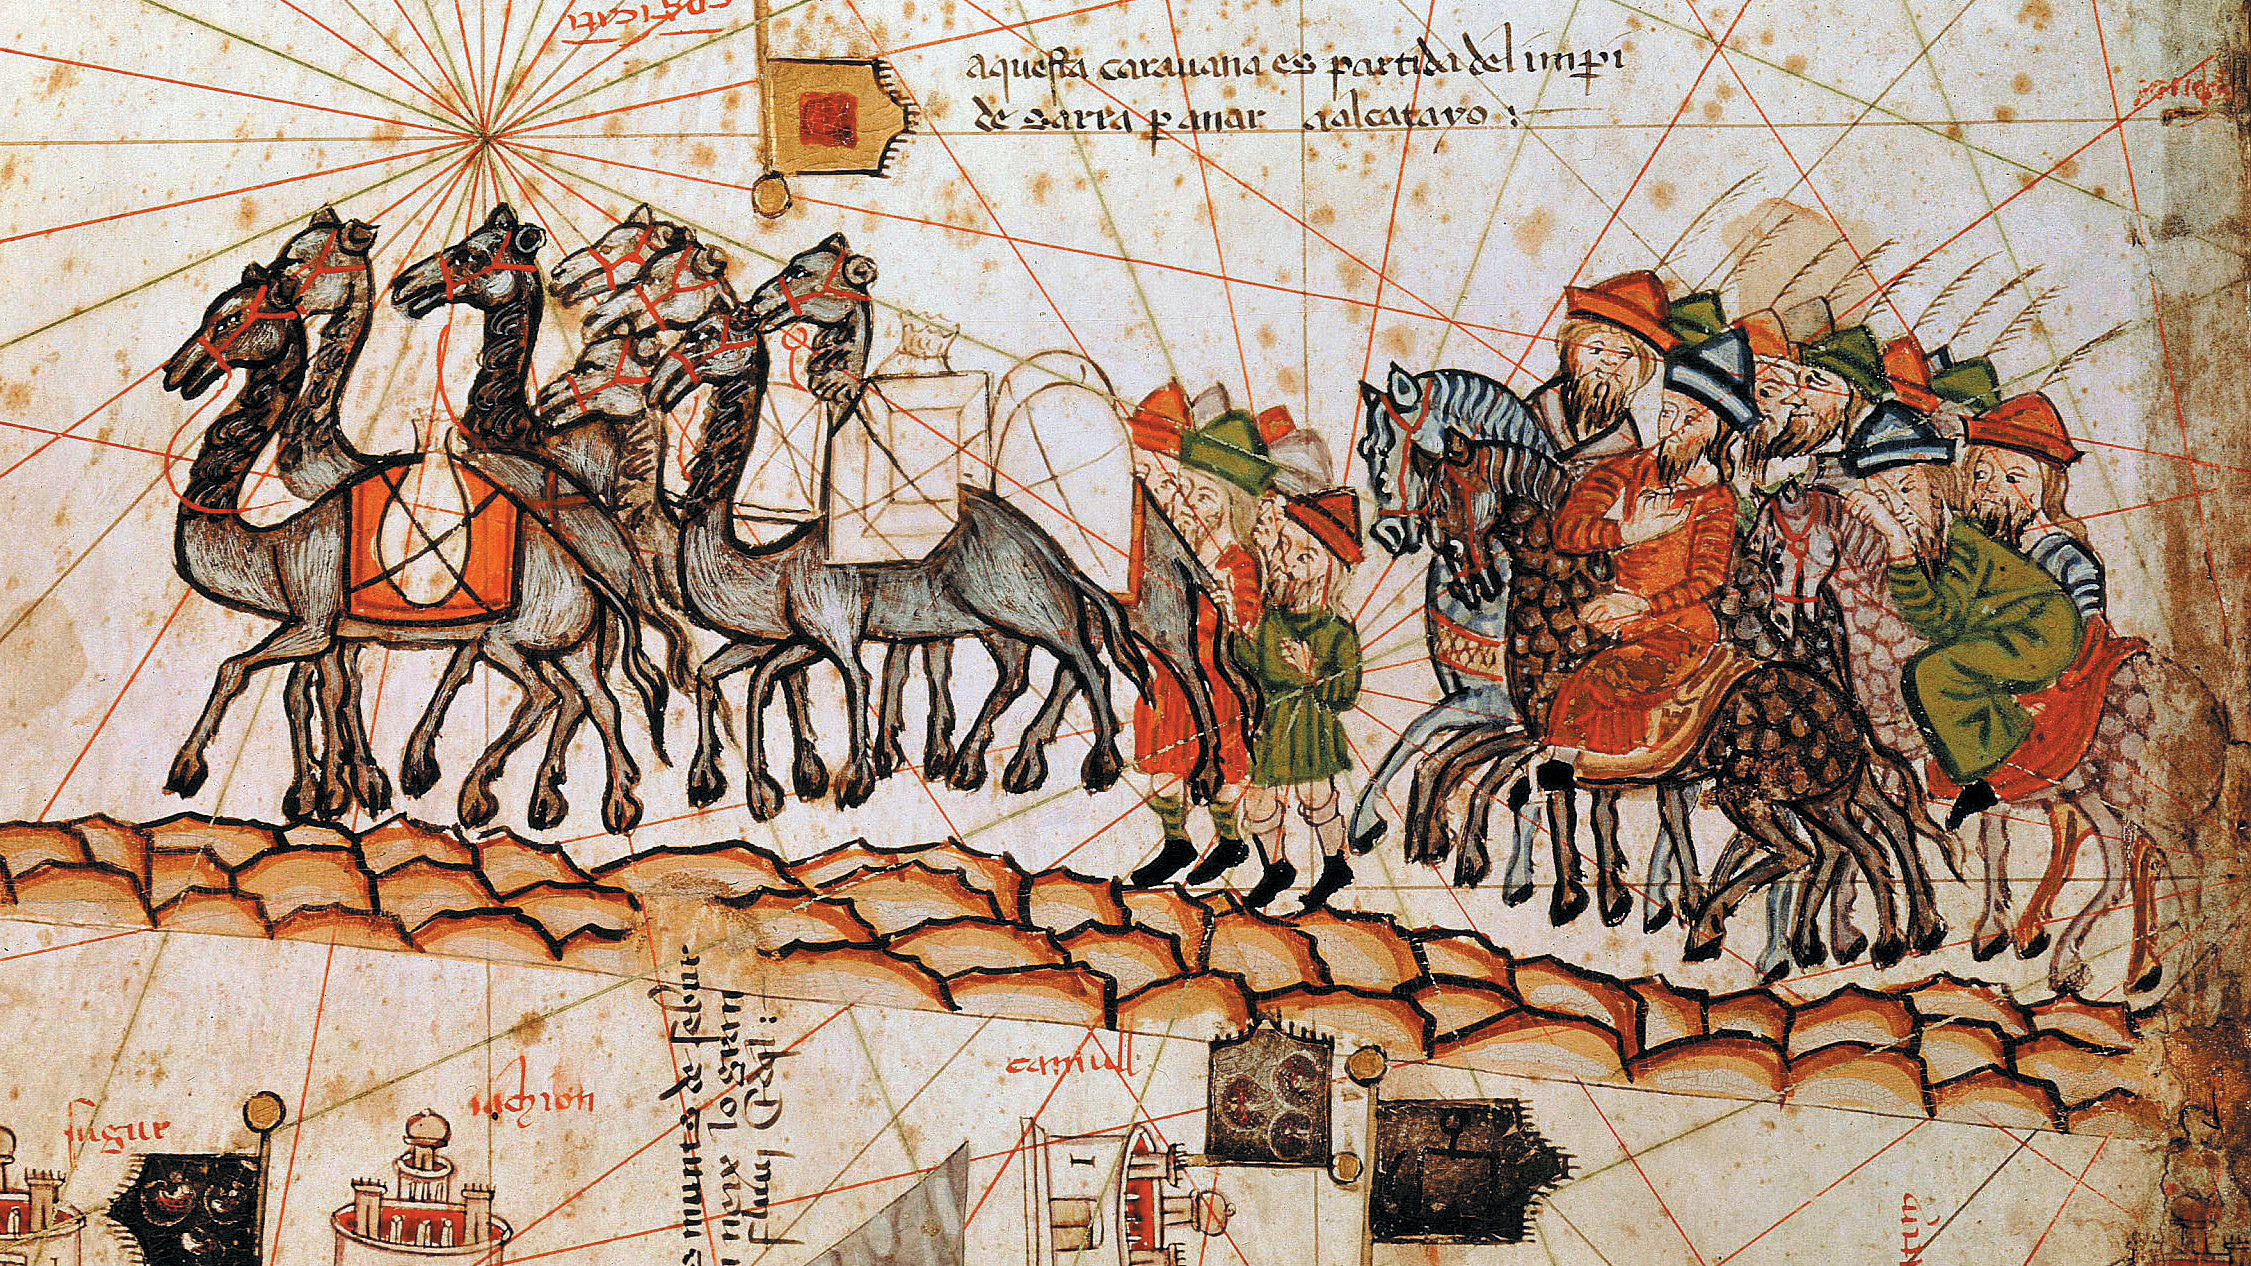 Italian traveler Marco Polo, shown in this medieval painting leading his 13th-century caravan across Asia, crossed paths briefly with the much-dreaded Assassins. Unlike many, Polo lived to tell about it.